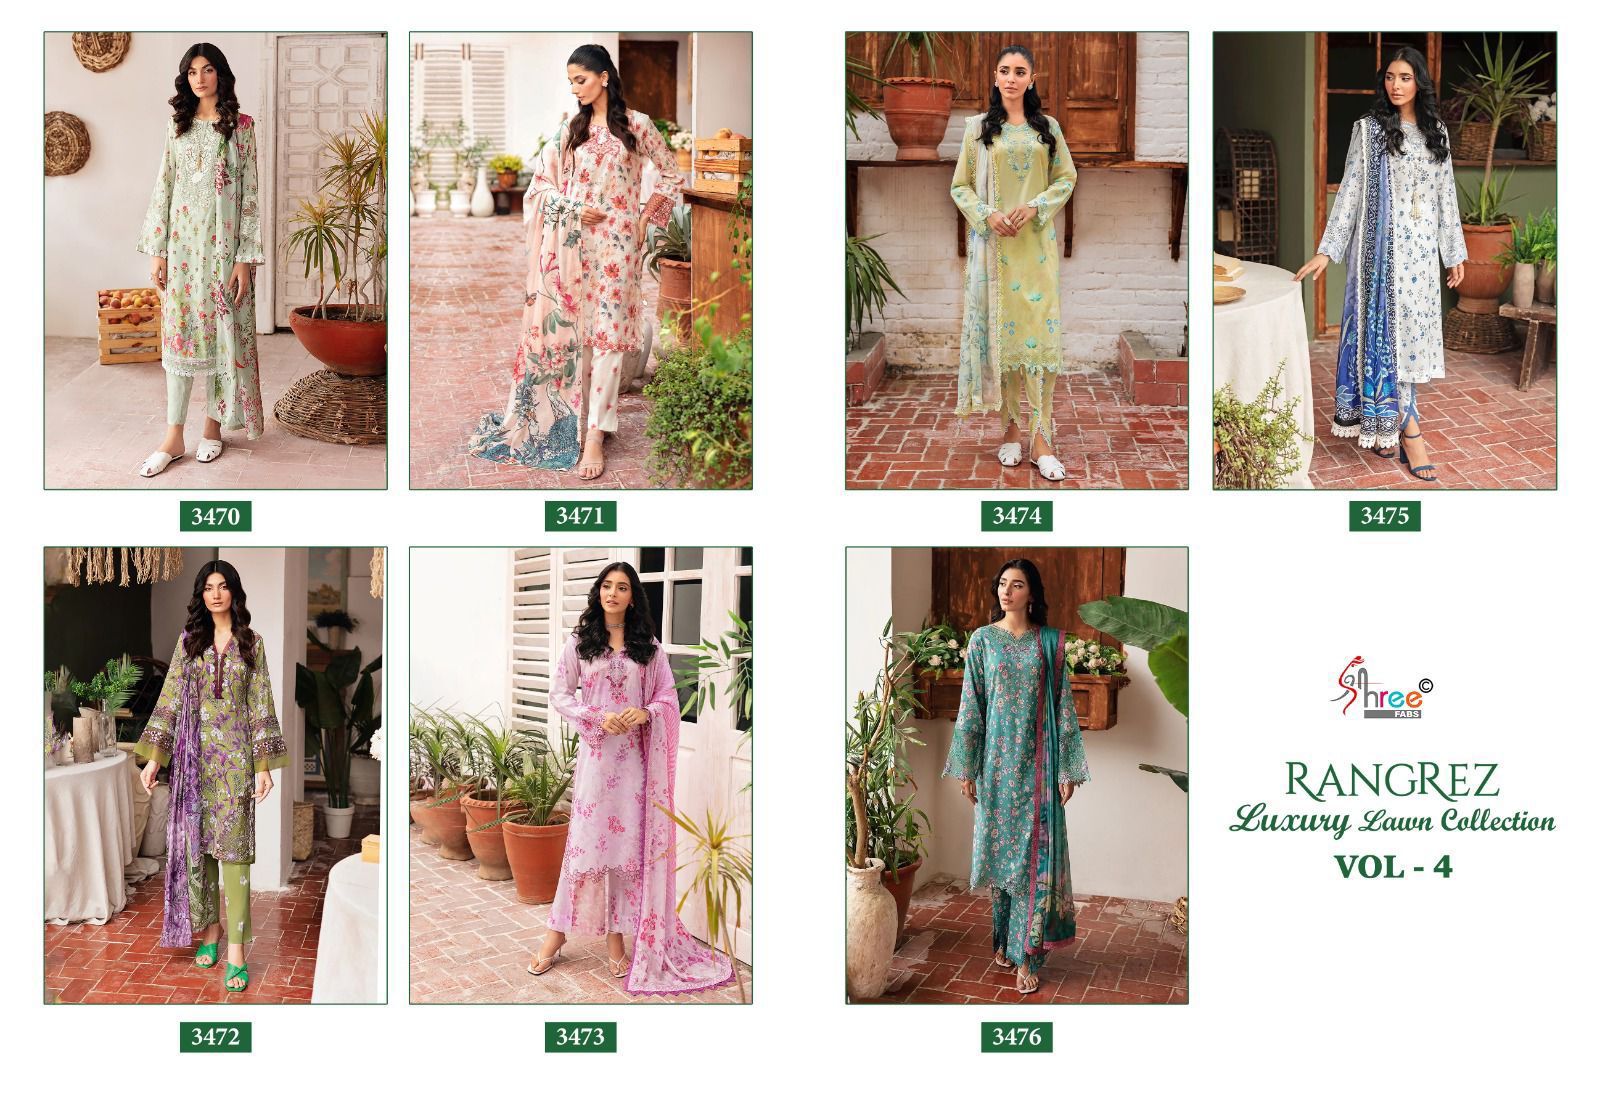 Shree Rangrez Luxury Lawn Collection Vol 4 collection 2